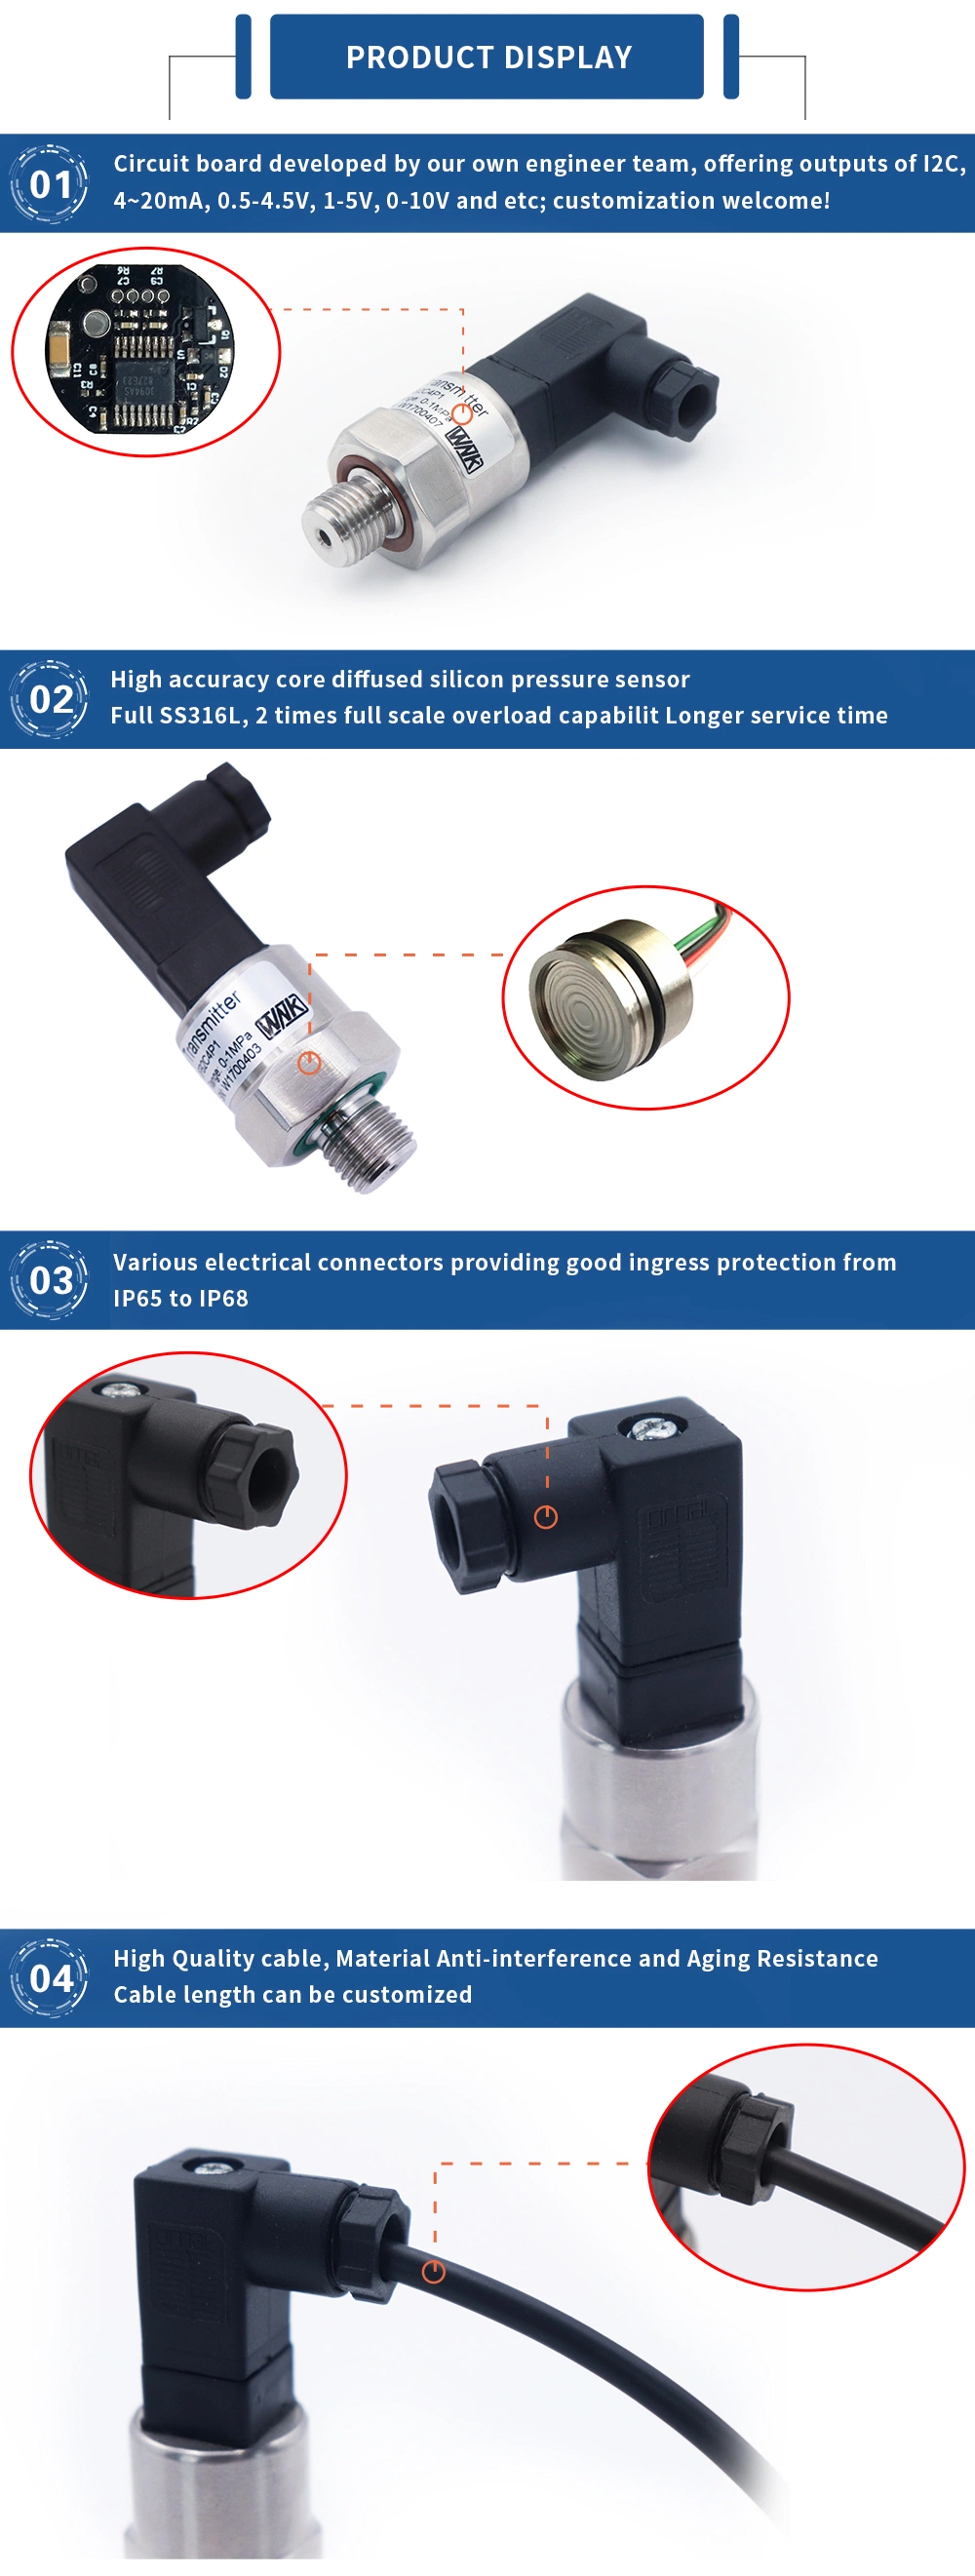 Oil Pressure Sensor for Smart Driking Water and Nature Gas Controlling System